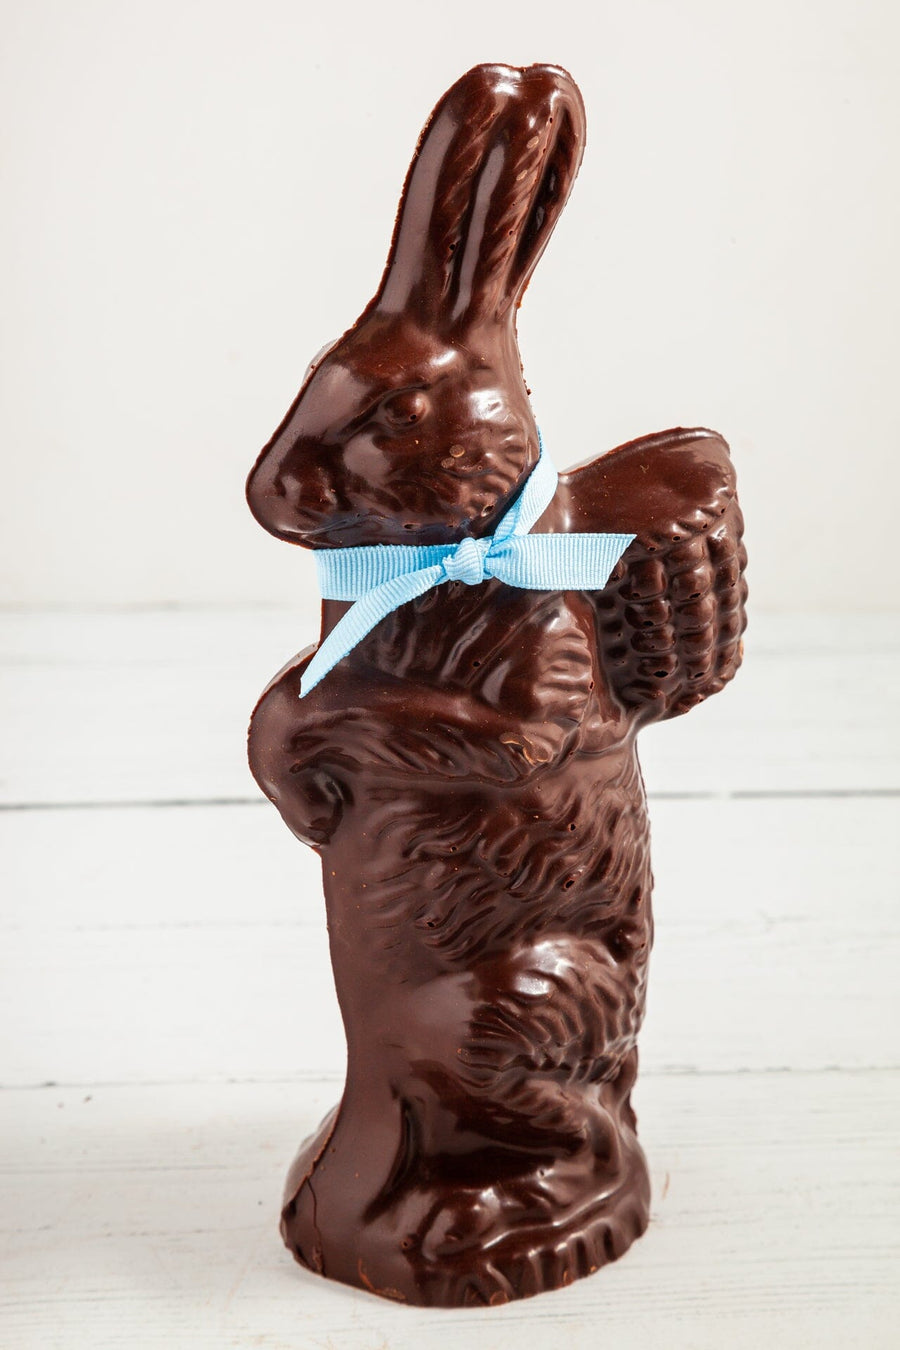 Large Vintage Chocolate Easter Bunny (Limited Edition) Romanicos Chocolate 15